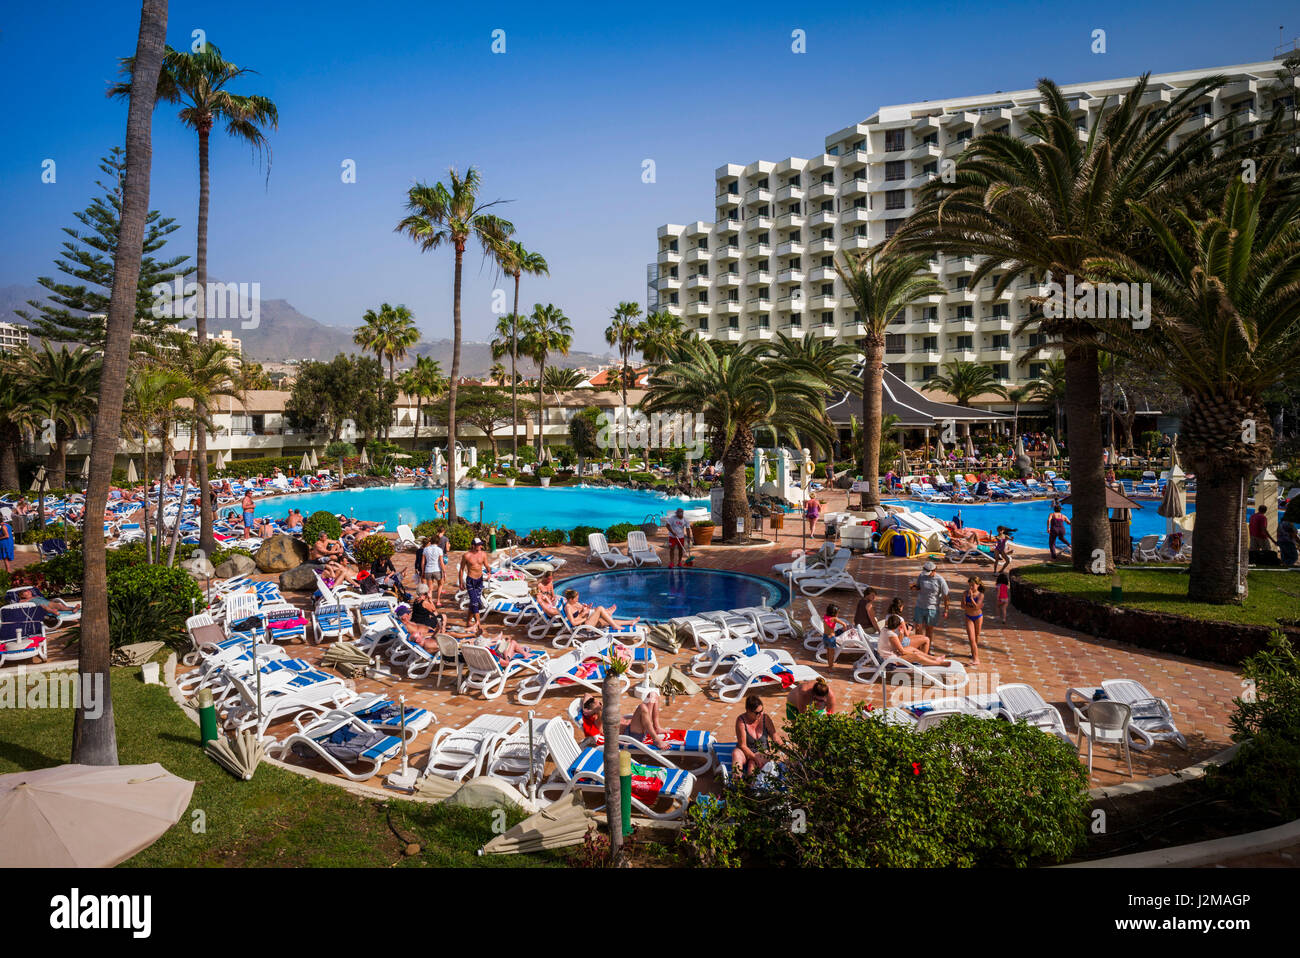 Hotel Las Palmeras High Resolution Stock Photography and Images - Alamy